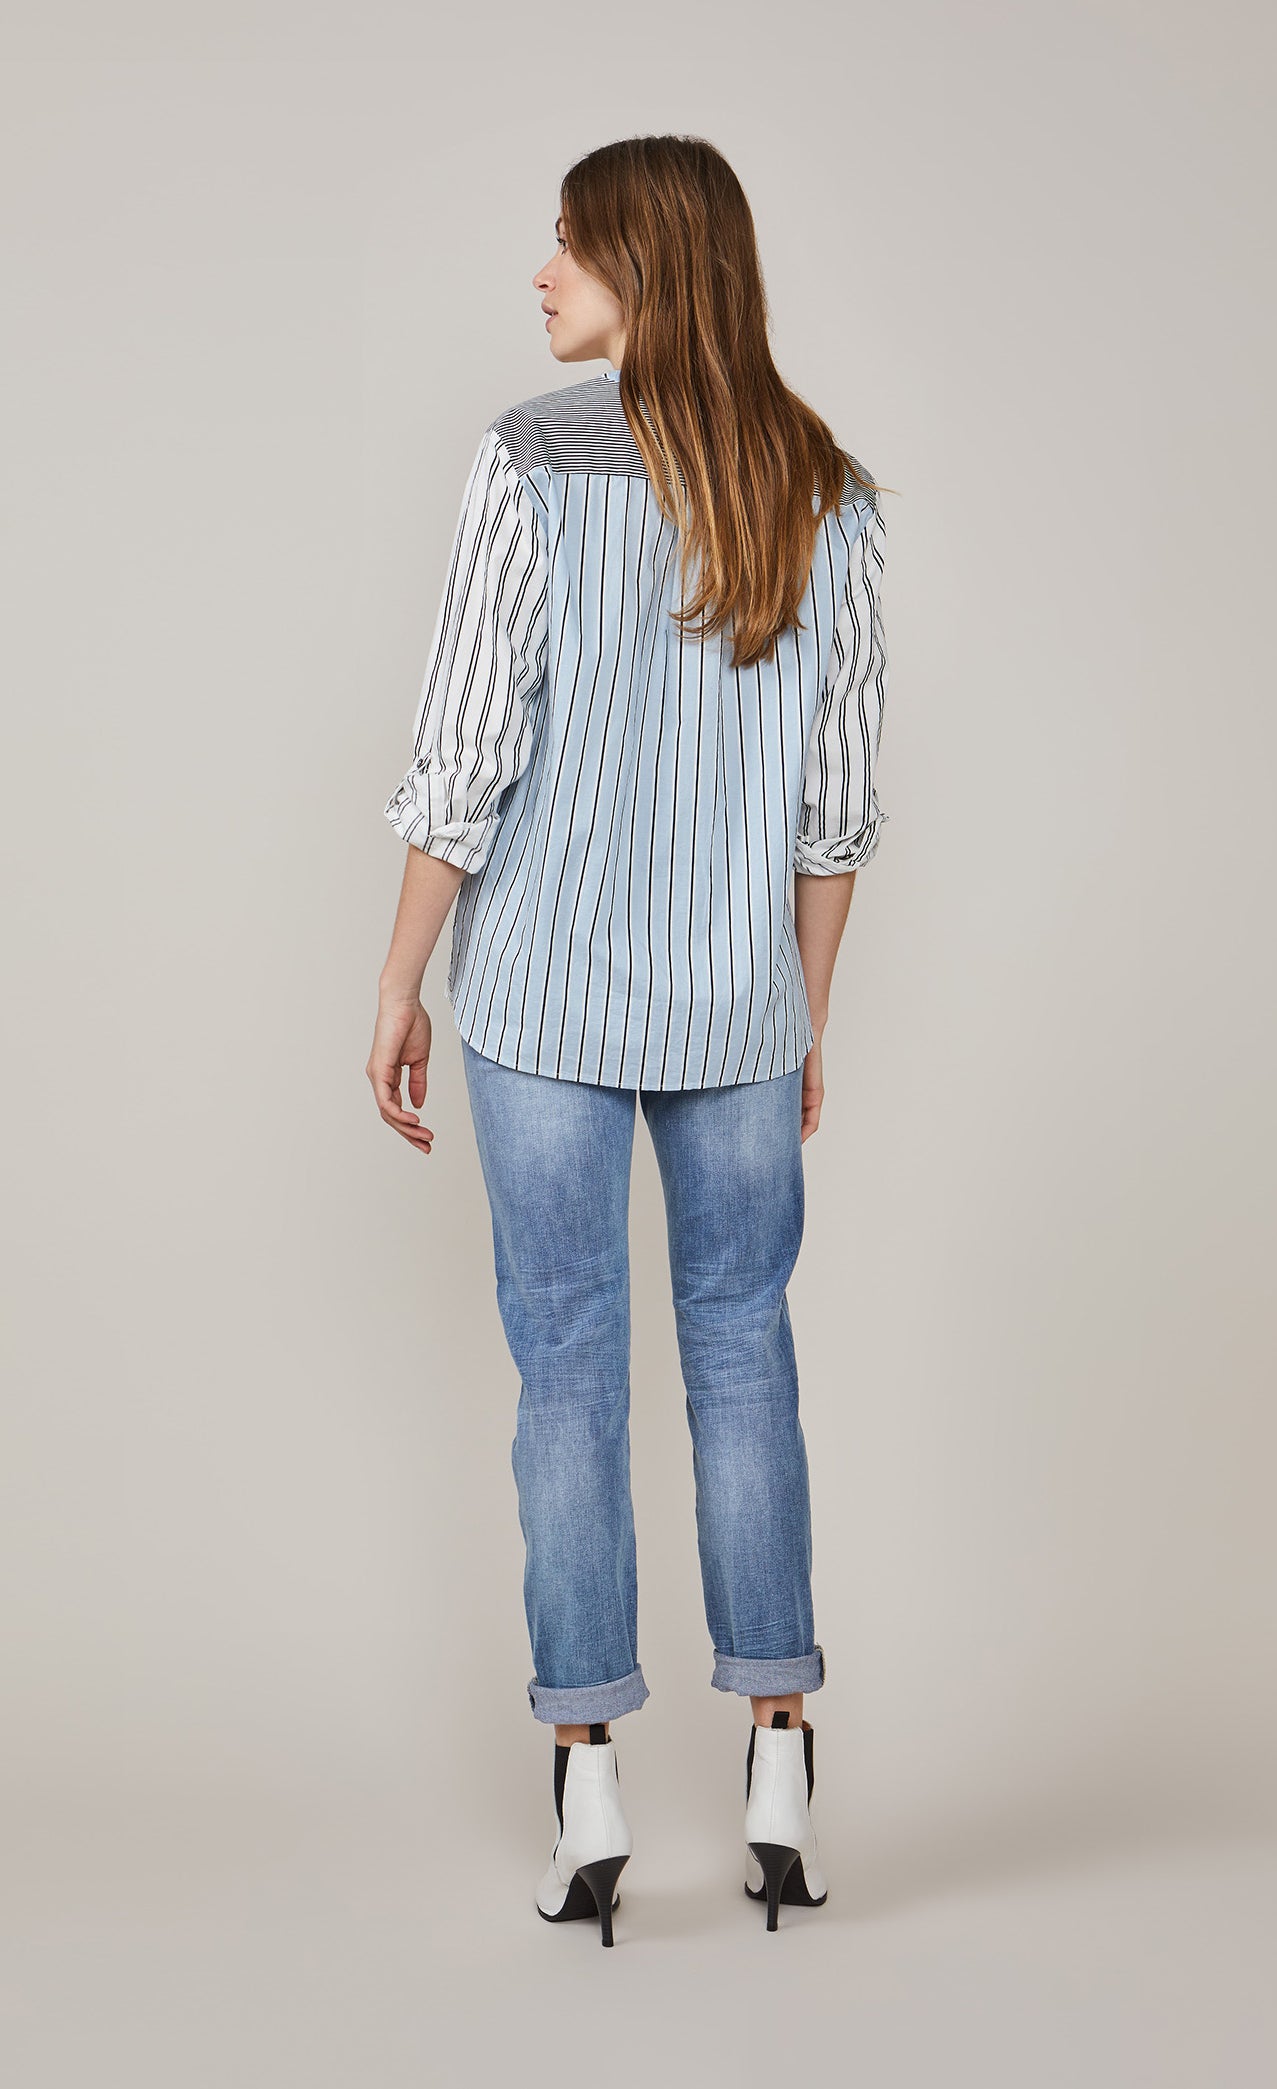 Back full body view of a woman wearing the summum mixed stripes blouse. This blouse rolled up sleeves, a yoked back, black stripes on a blue and white background.